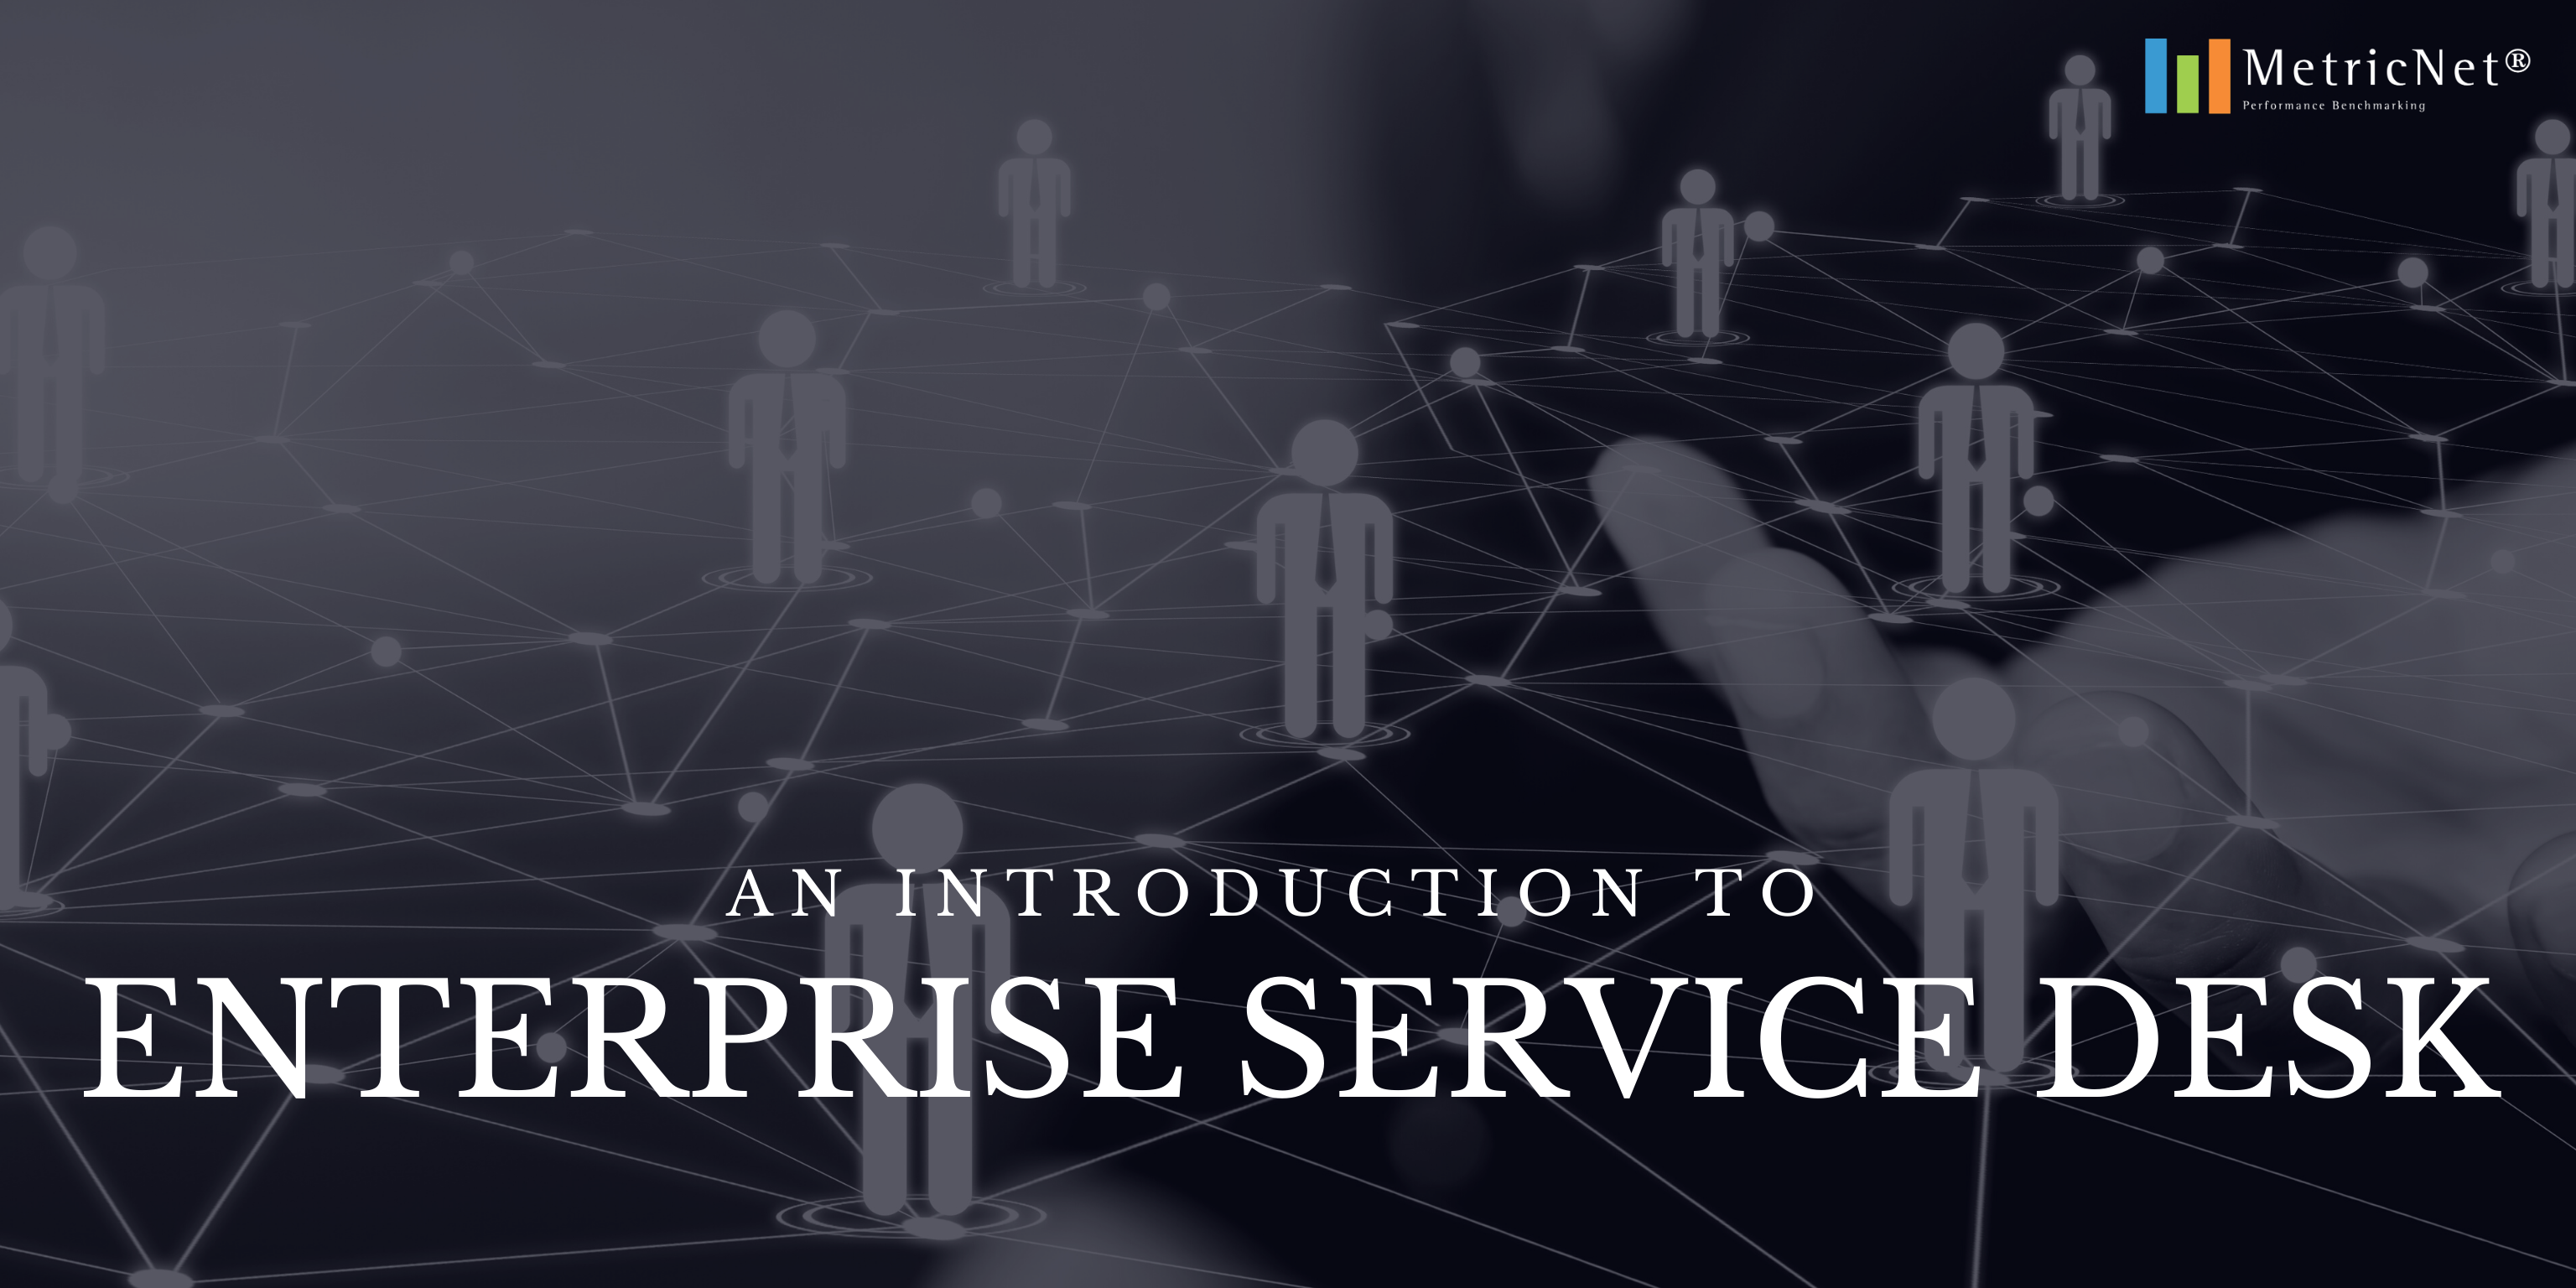 The Coming Enterprise Service Desk – How Information Technology Can Lead the Way in Enterprise Services